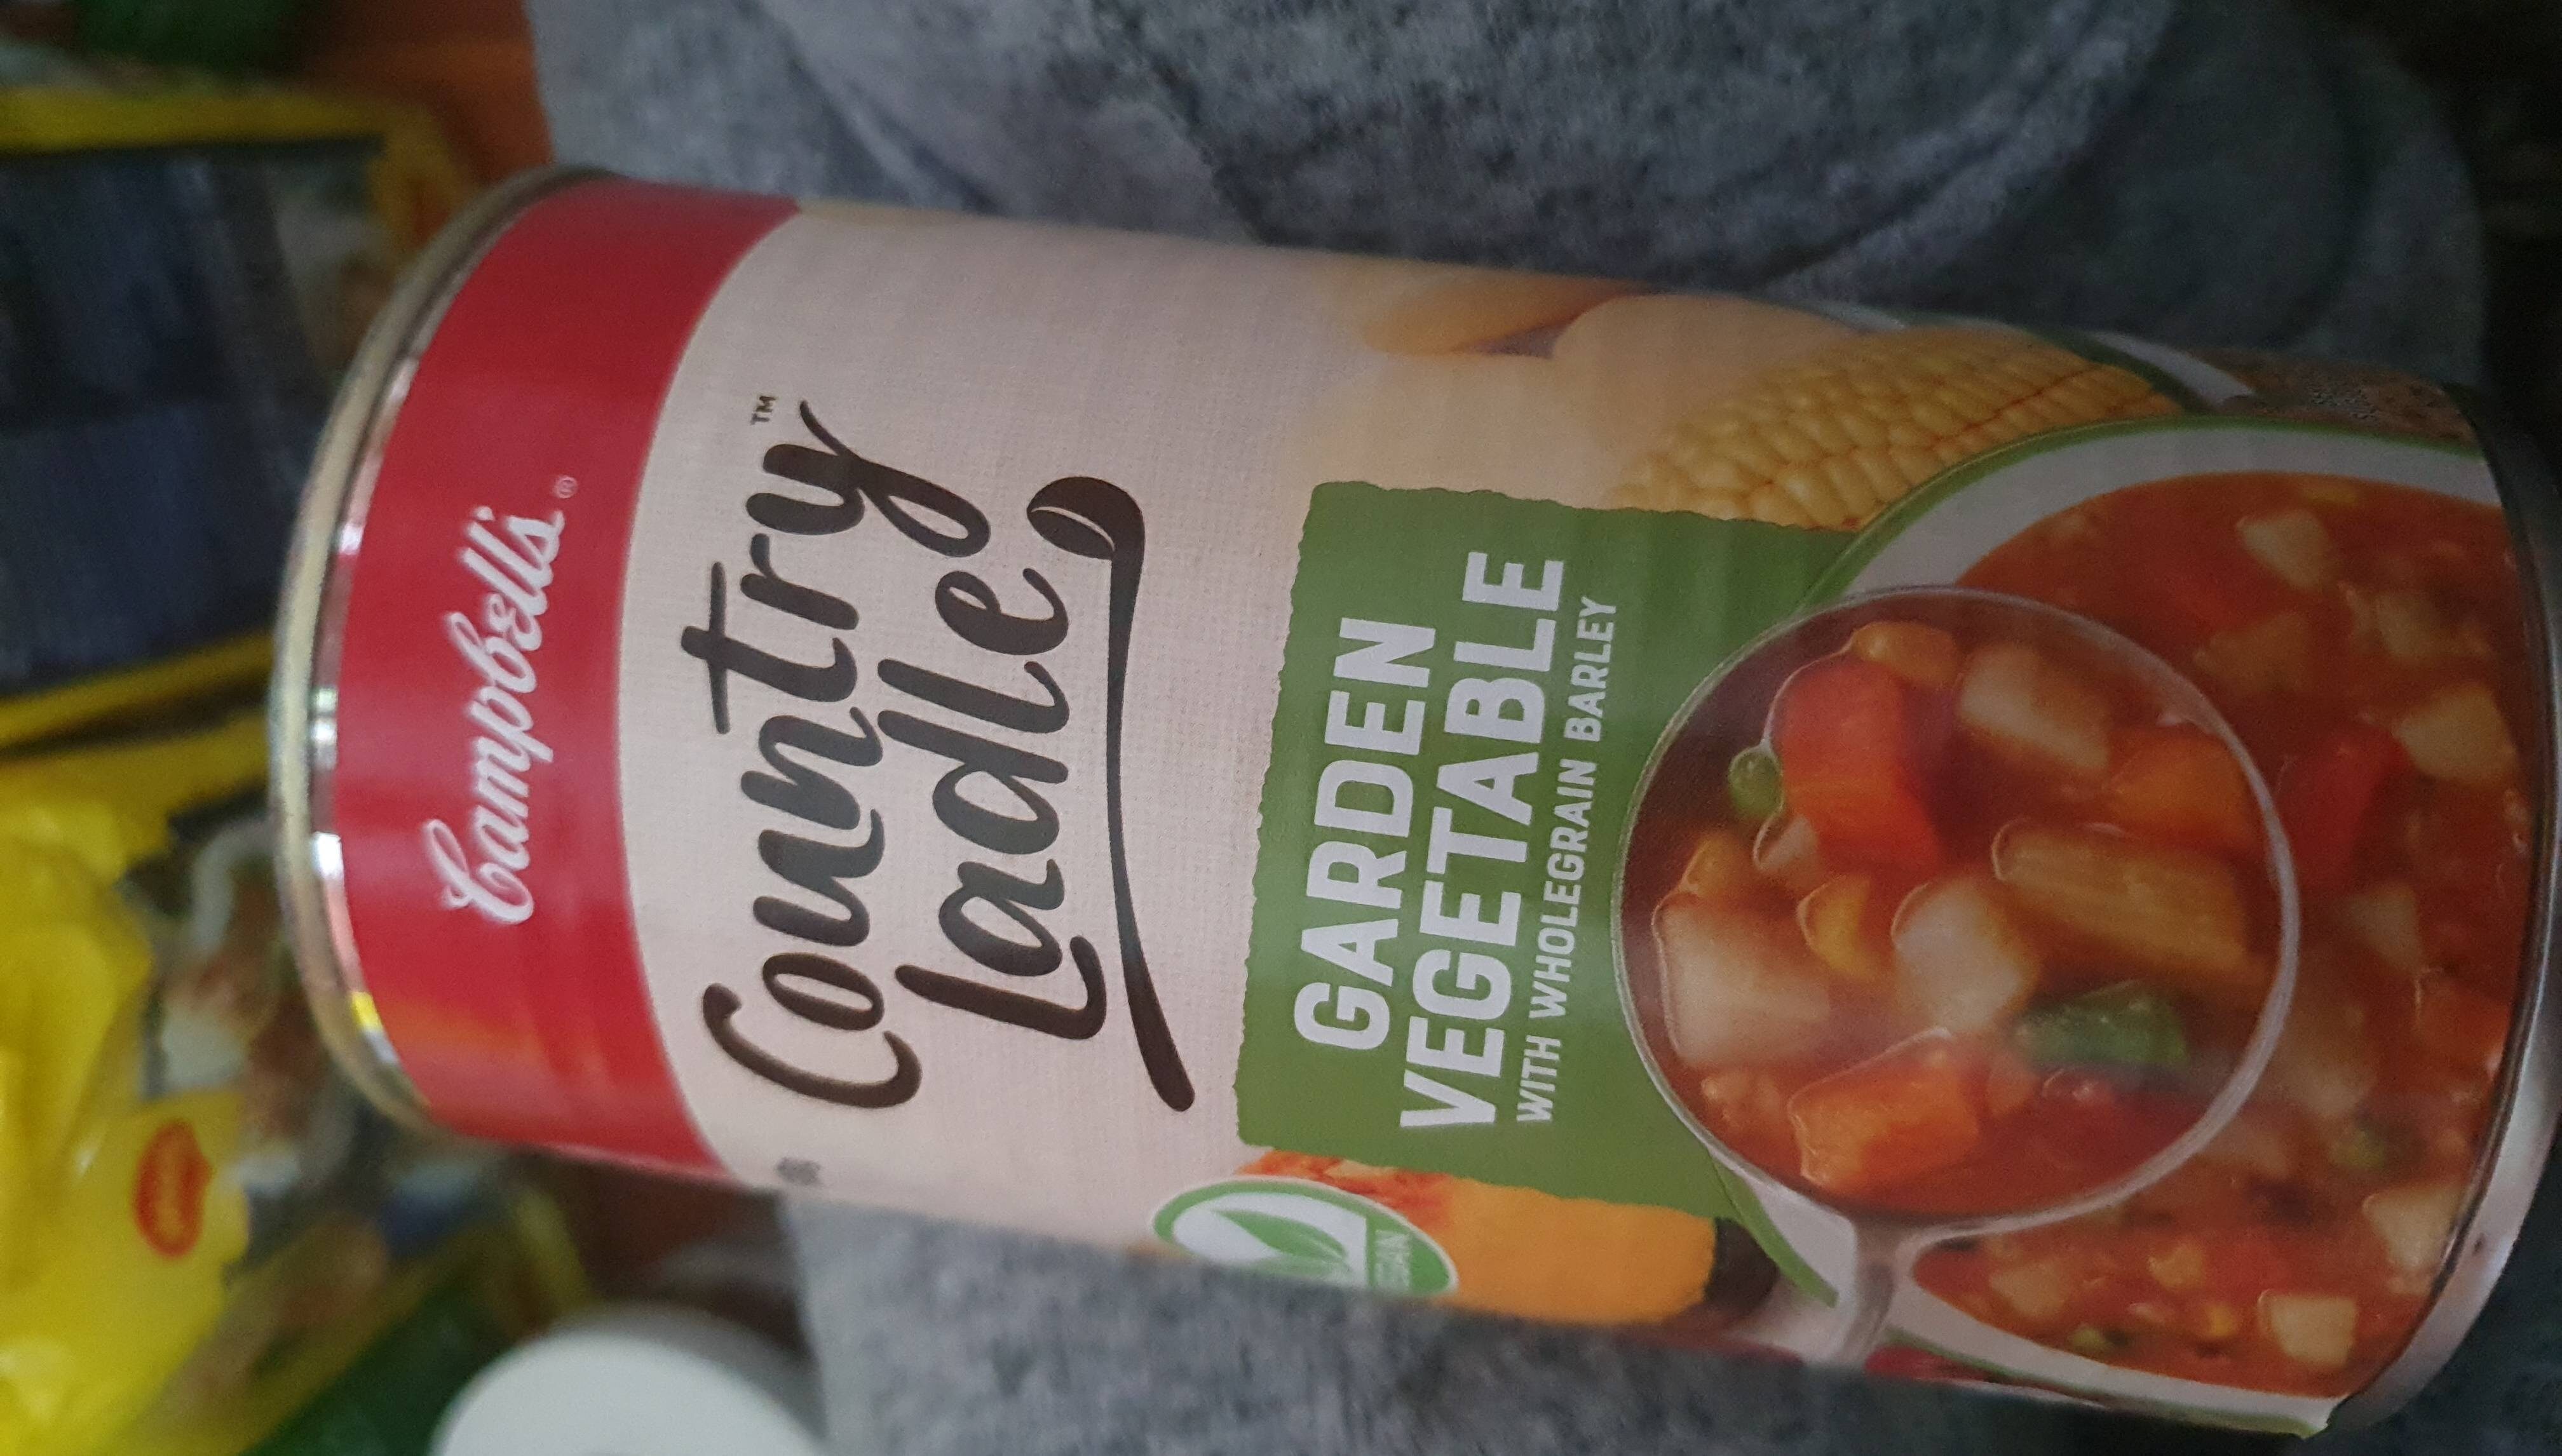 Campbell's garden vegetable soup - Product